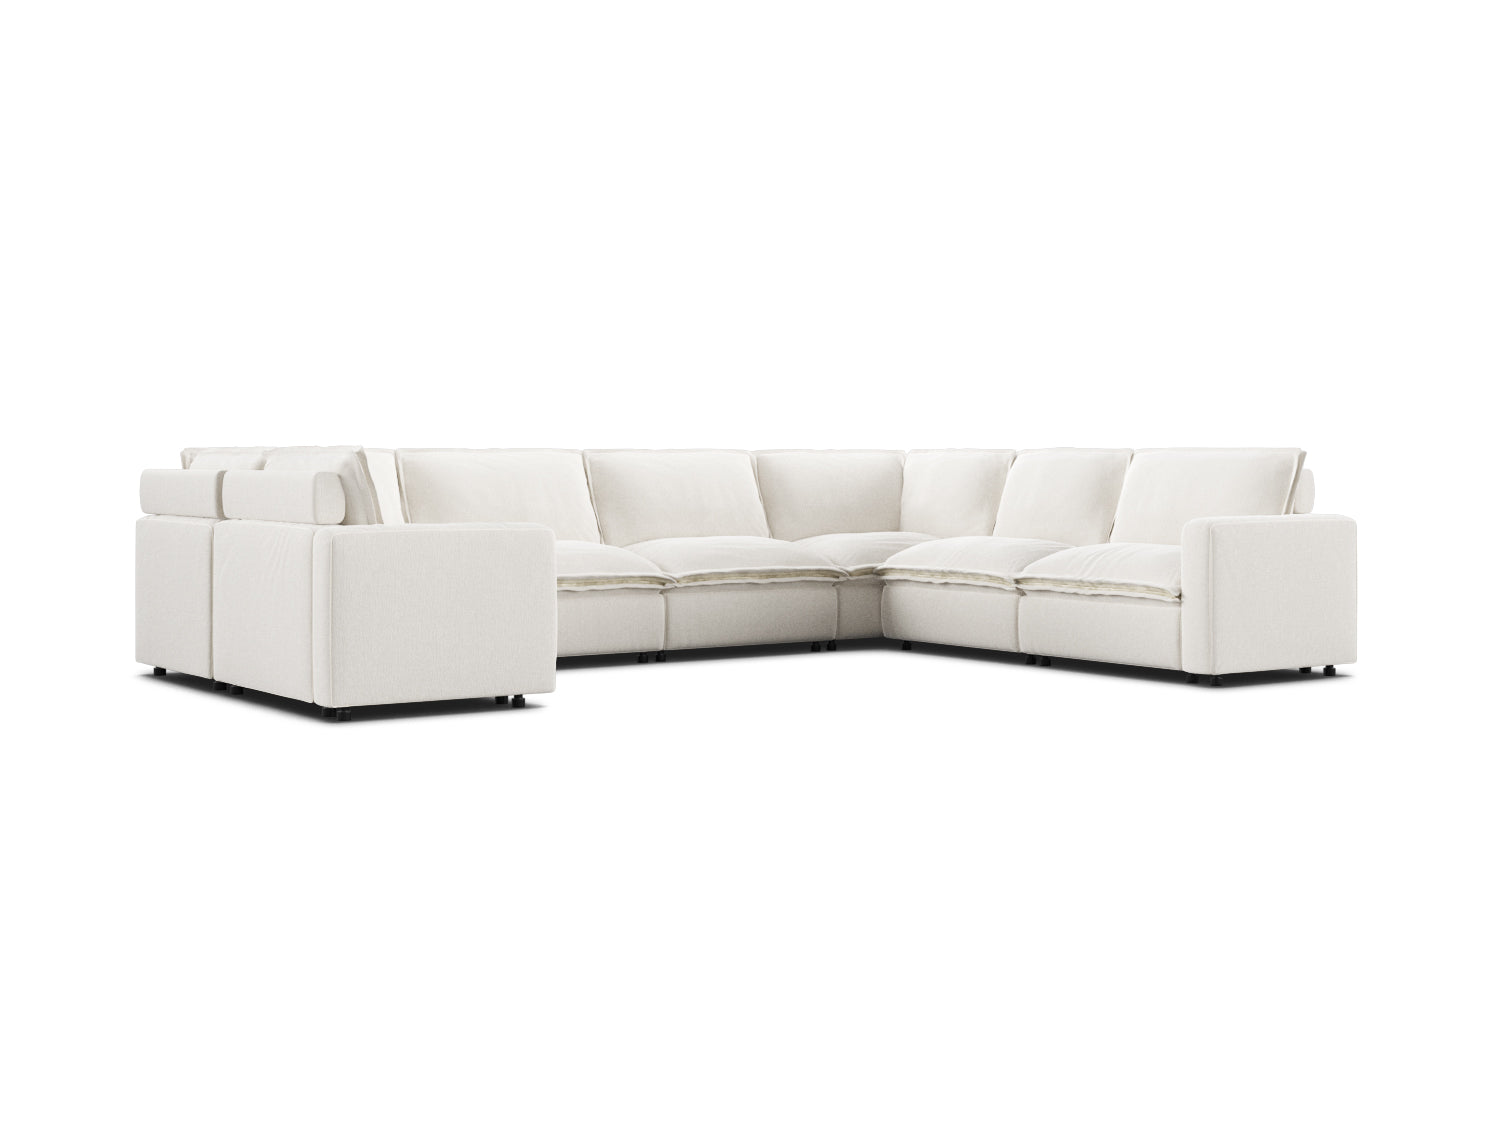 7 seat sectional couch, U-shaped in white linen fabric, modular